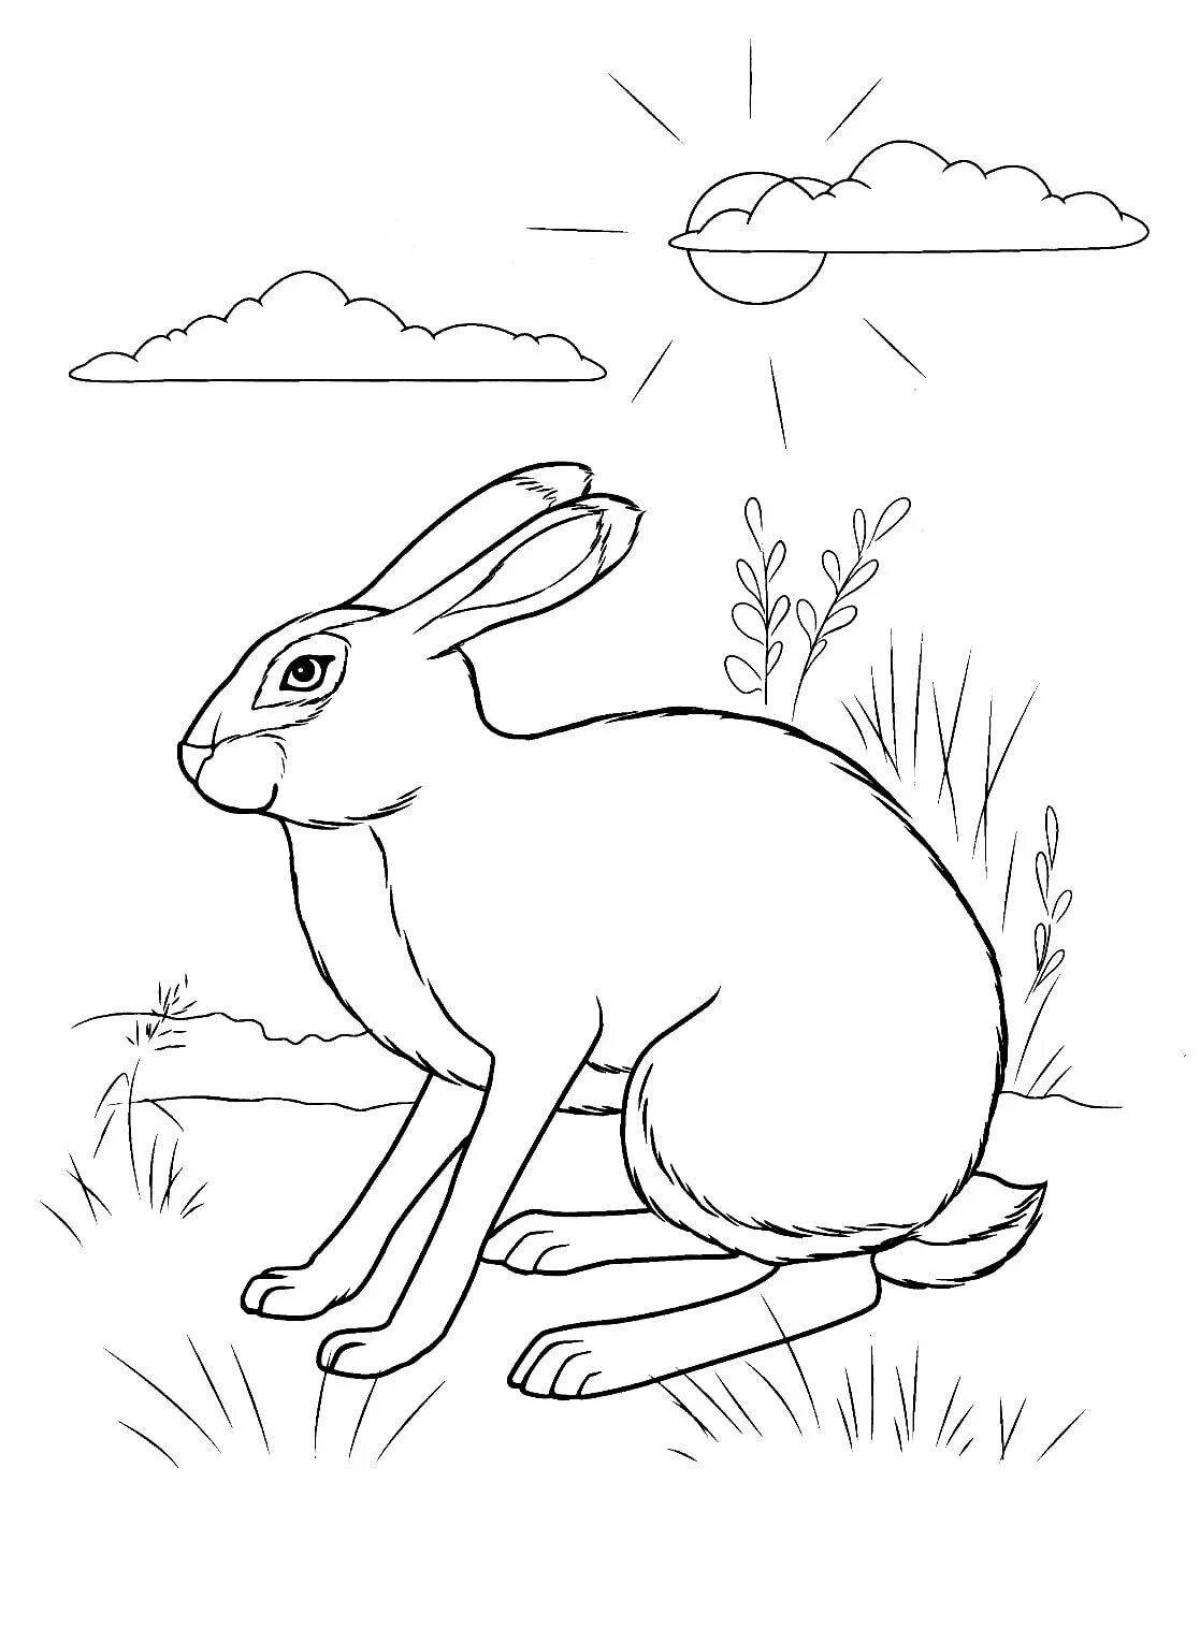 Exciting hunters and rabbits coloring book